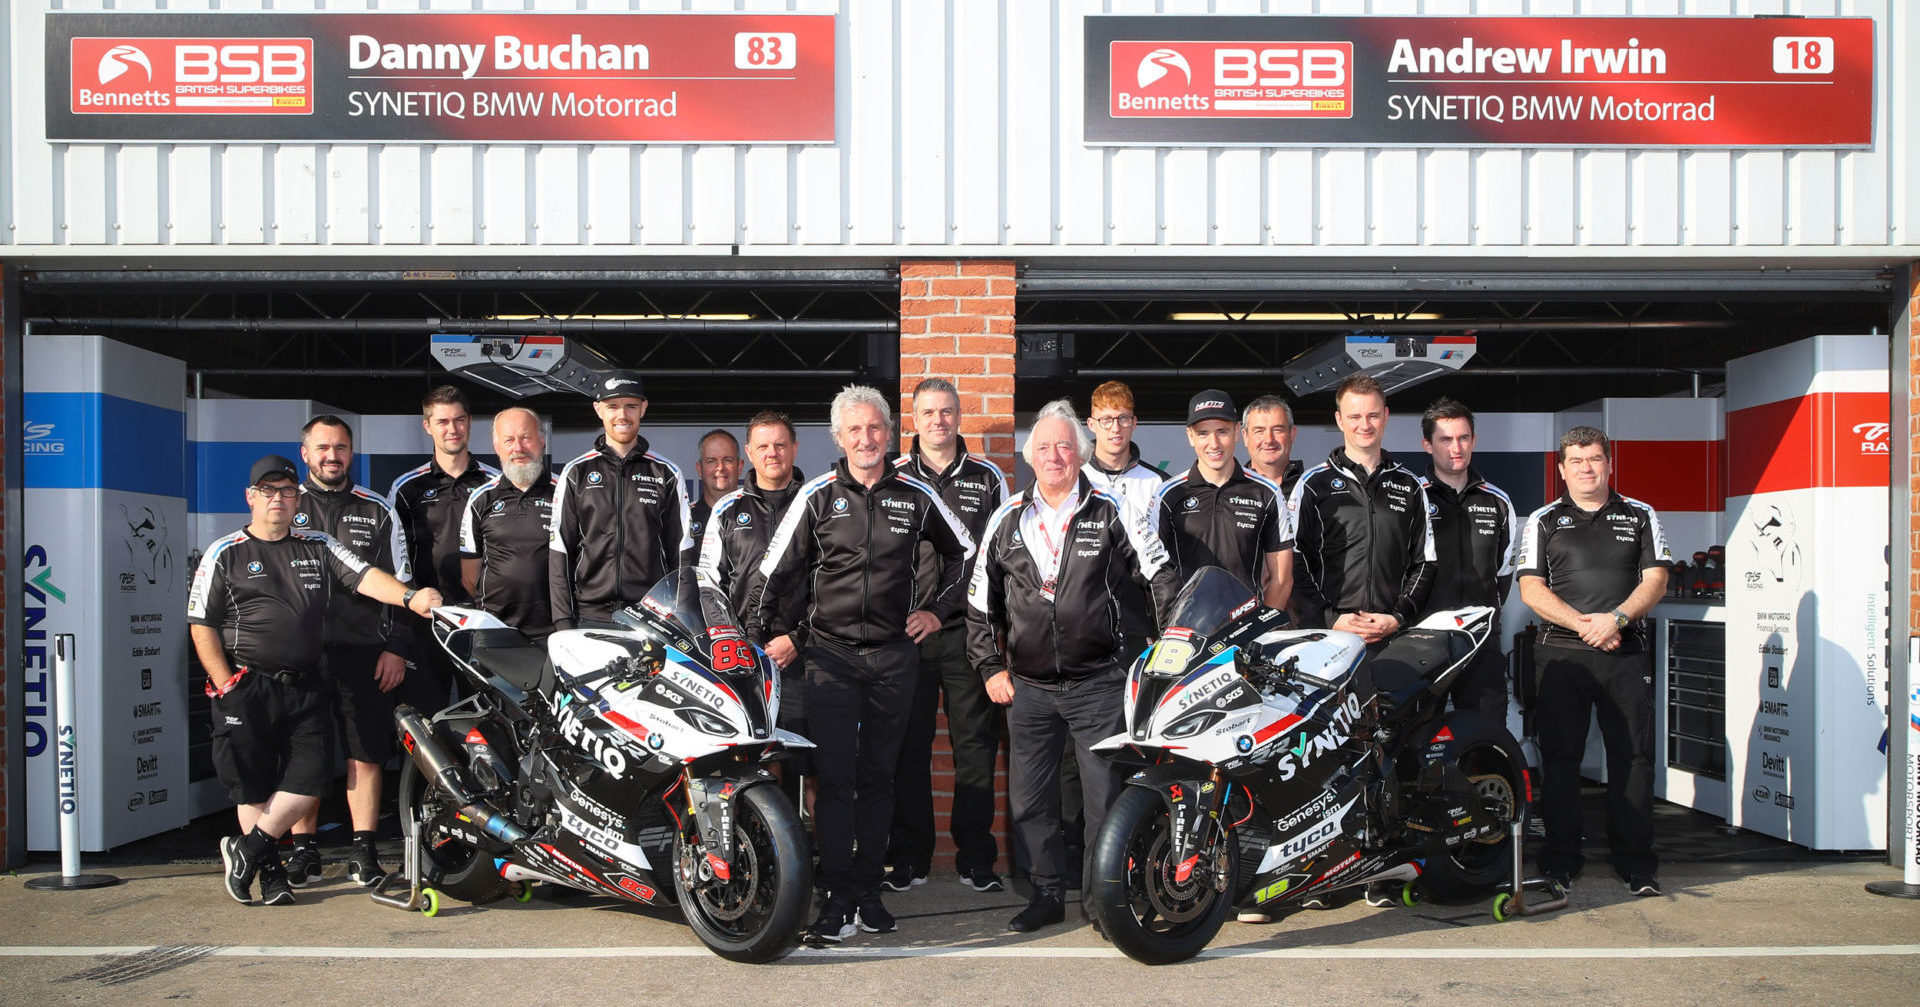 The SYNETIQ BMW British Superbike team with rider Danny Buchan (fifth from left) and Andrew Irwin (fifth from right). Photo courtesy SYNETIQ BMW.